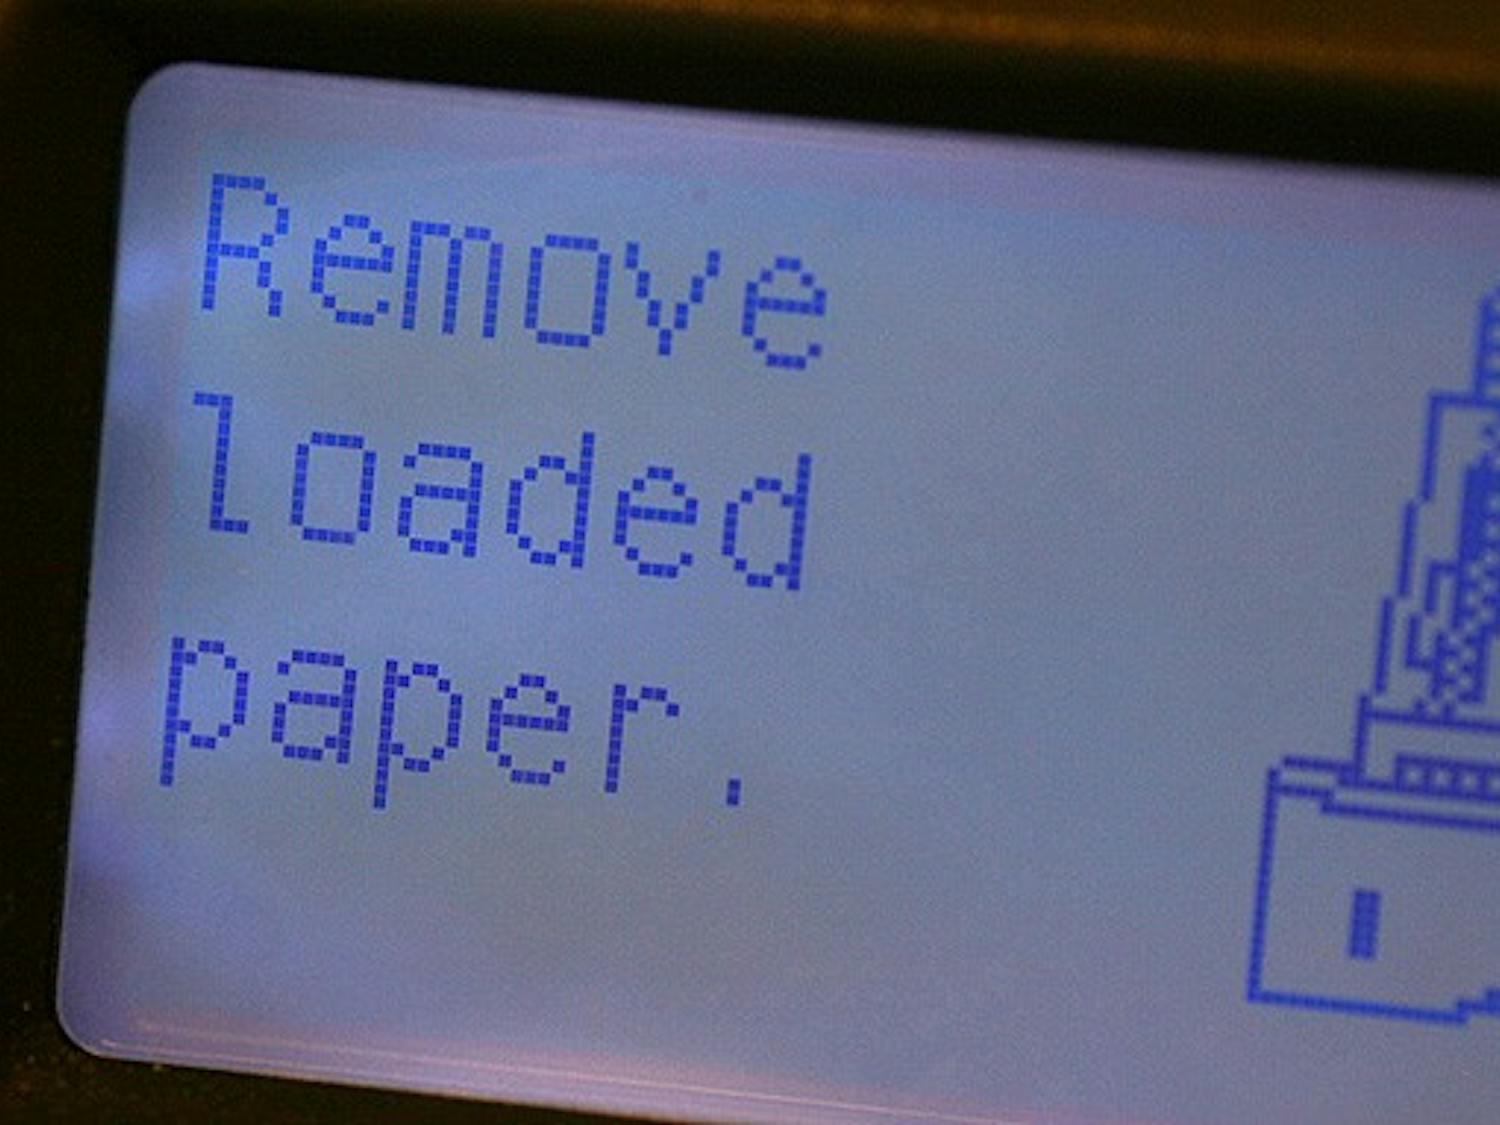 The Office of Information Technology responded to students’ concerns over malfunctioning printers around campus. OIT says the sheer size of the system, which incldues more than 145 printers, makes occasional errors impossible to mitigate. Most errors are recognized and fixed immediately through routine screening.